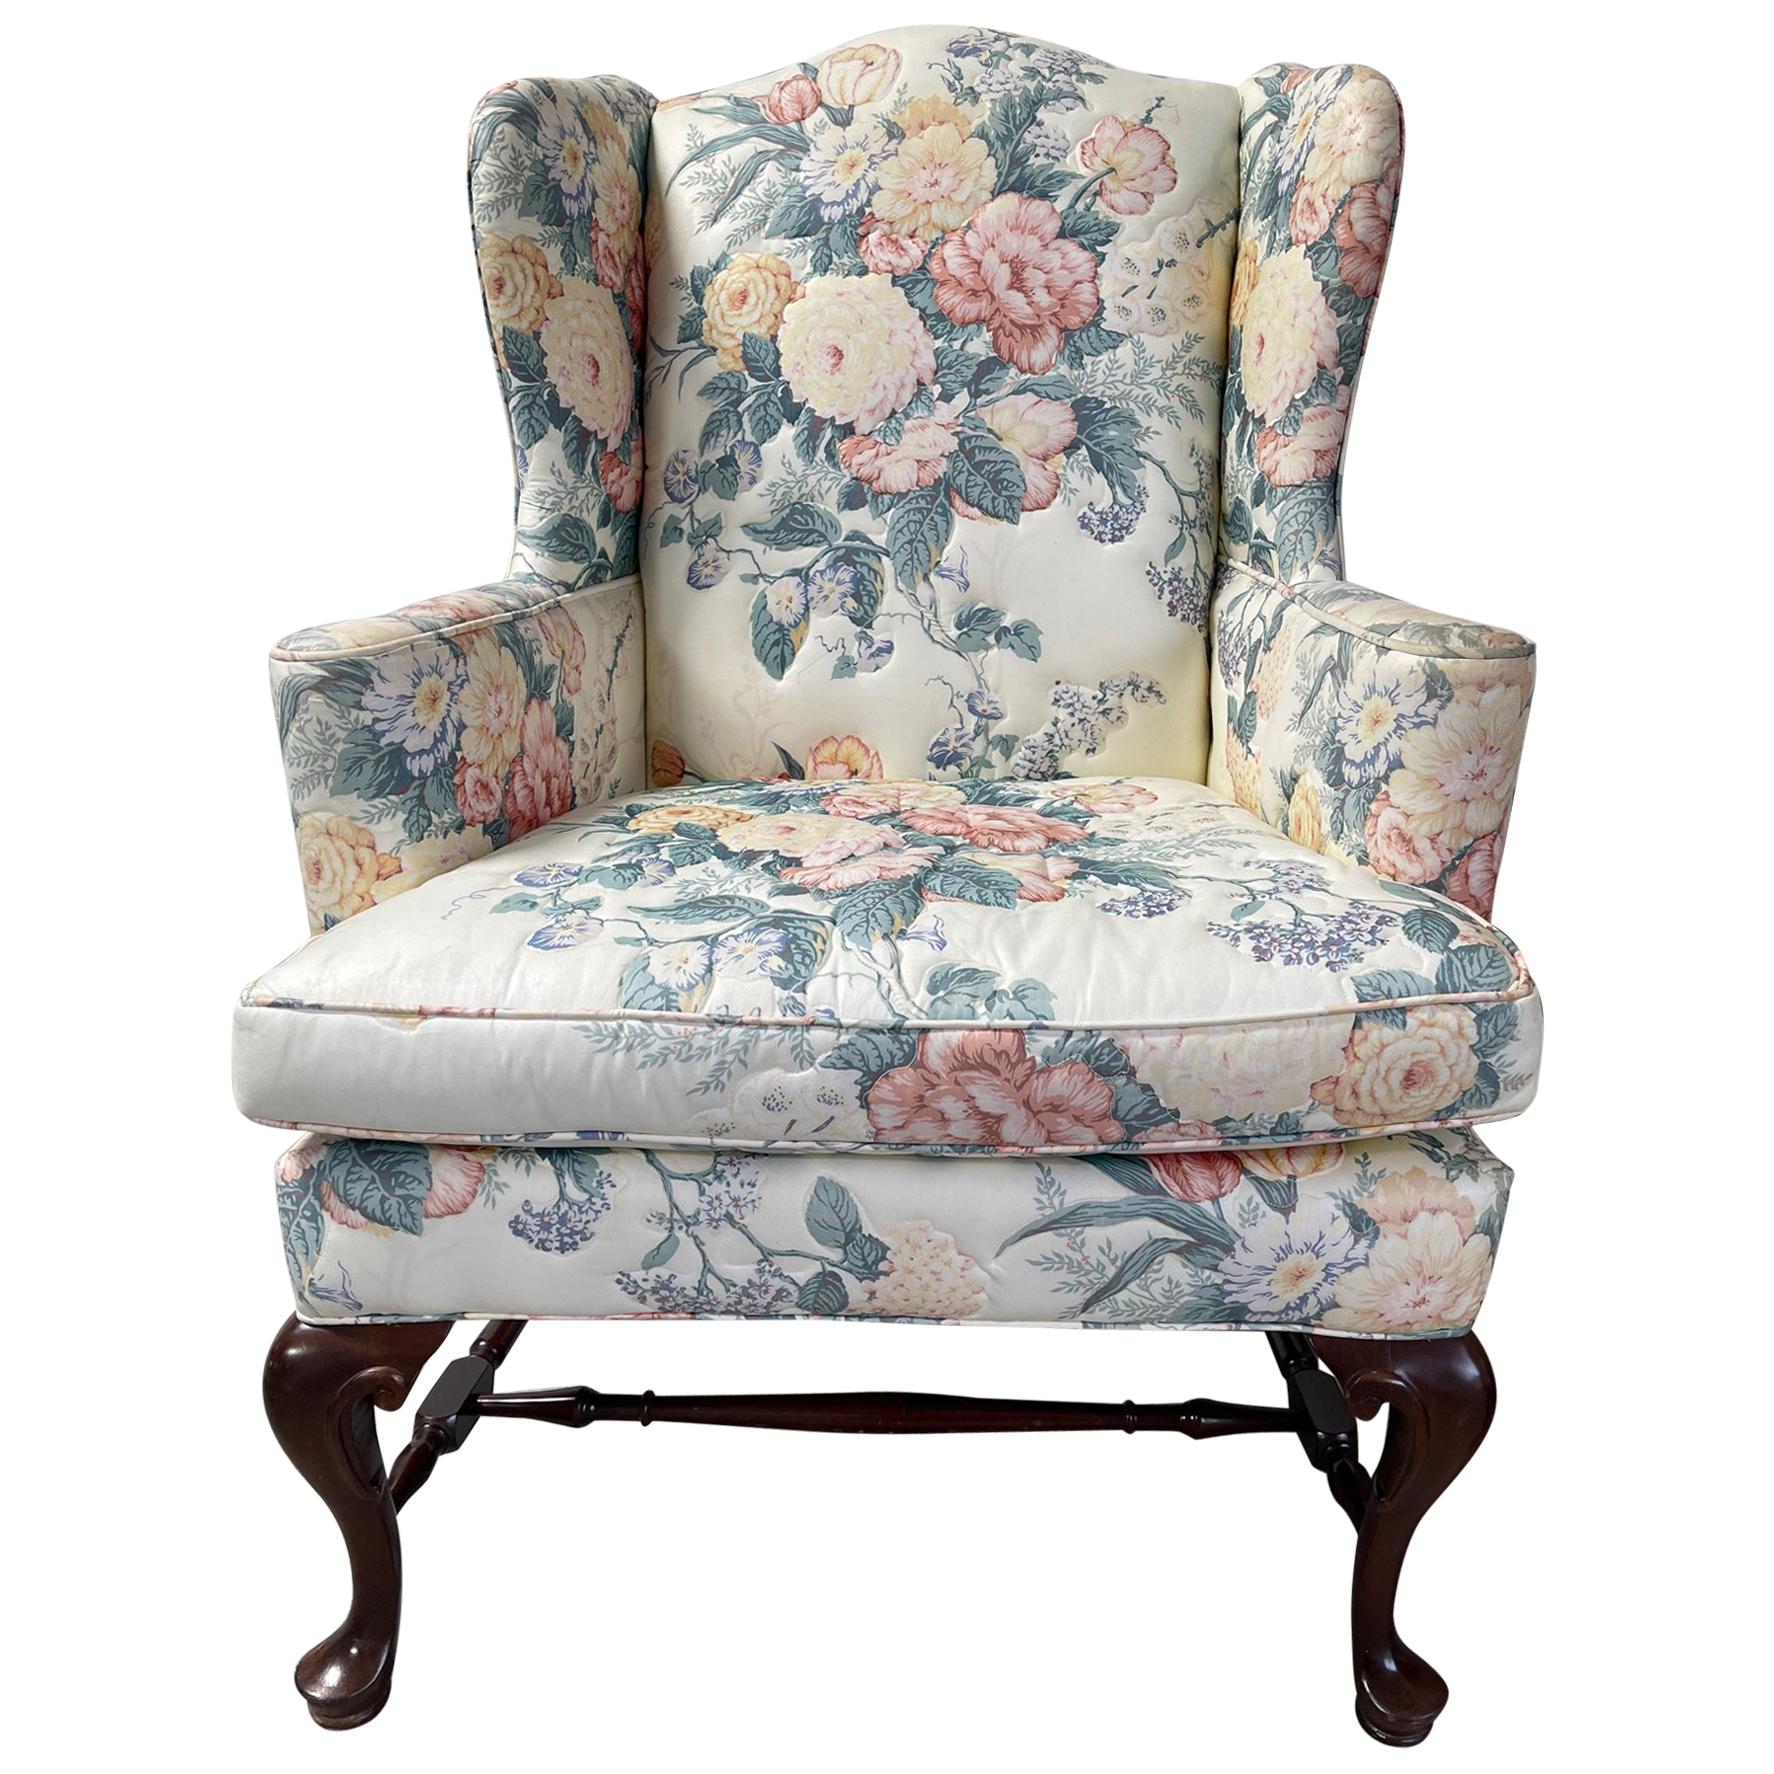 Upholstered Queen Anne Wingback Chair with Pad Feet and Stretcher, 20th Century